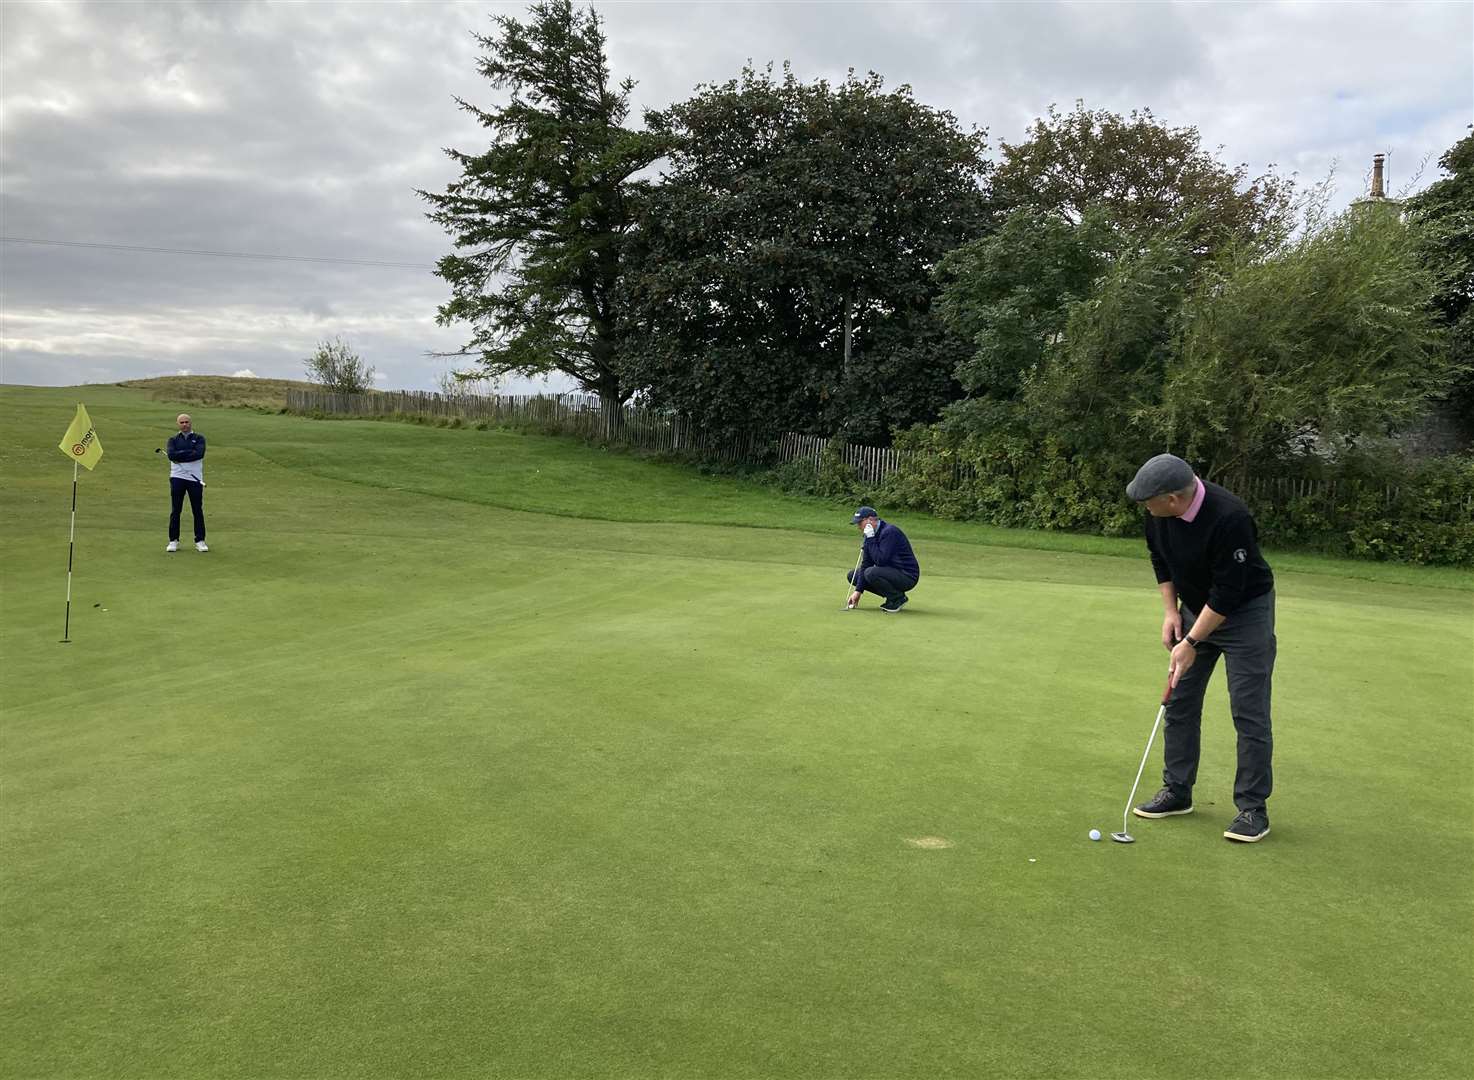 Steve Efemey, winner of Reay Golf Club's October Medal, putting at the 14th hole.